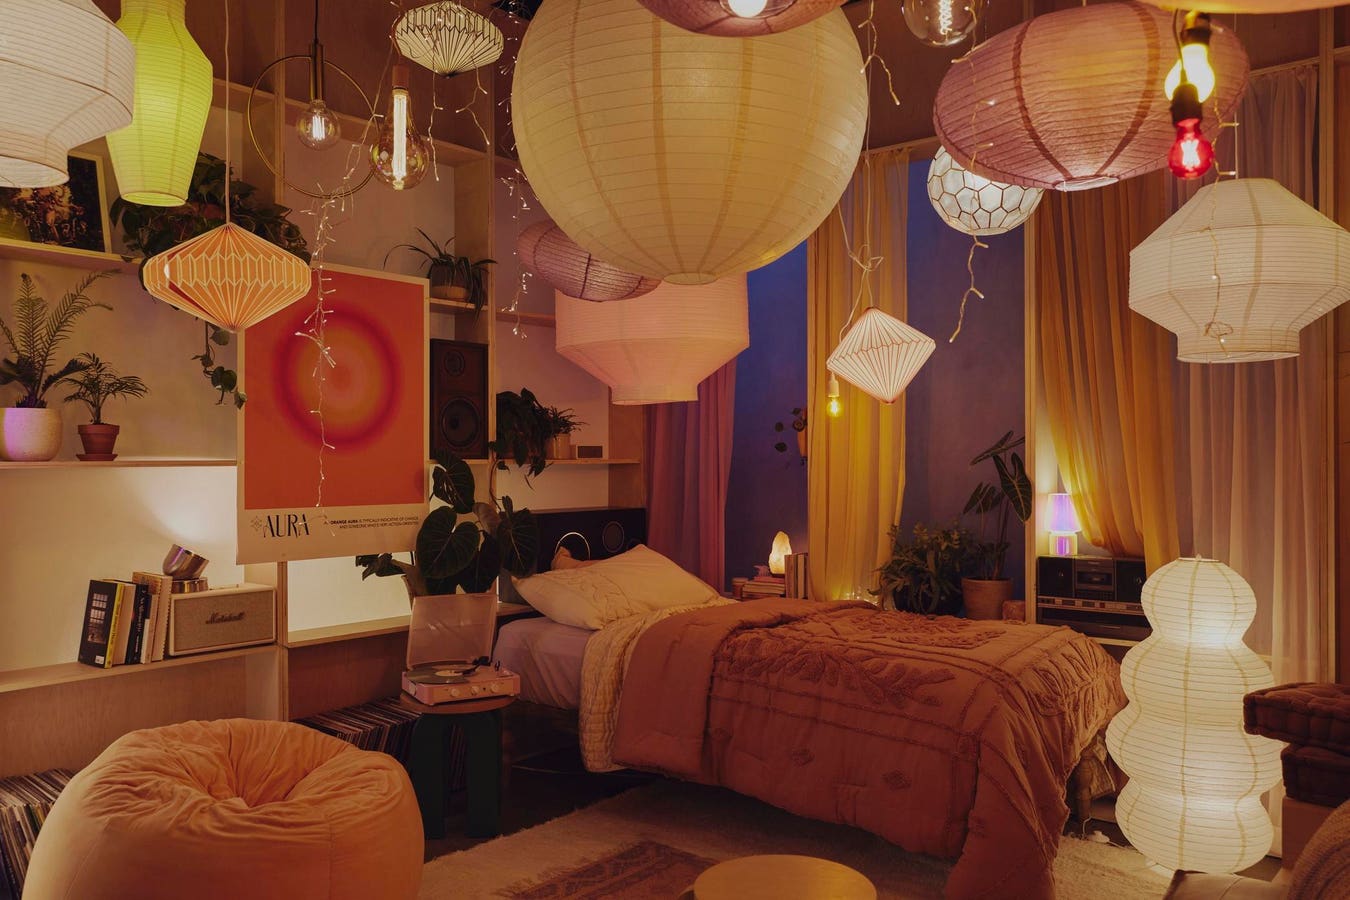 Urban Outfitters’ Latest Collaboration Redefines Dorm Room Decor